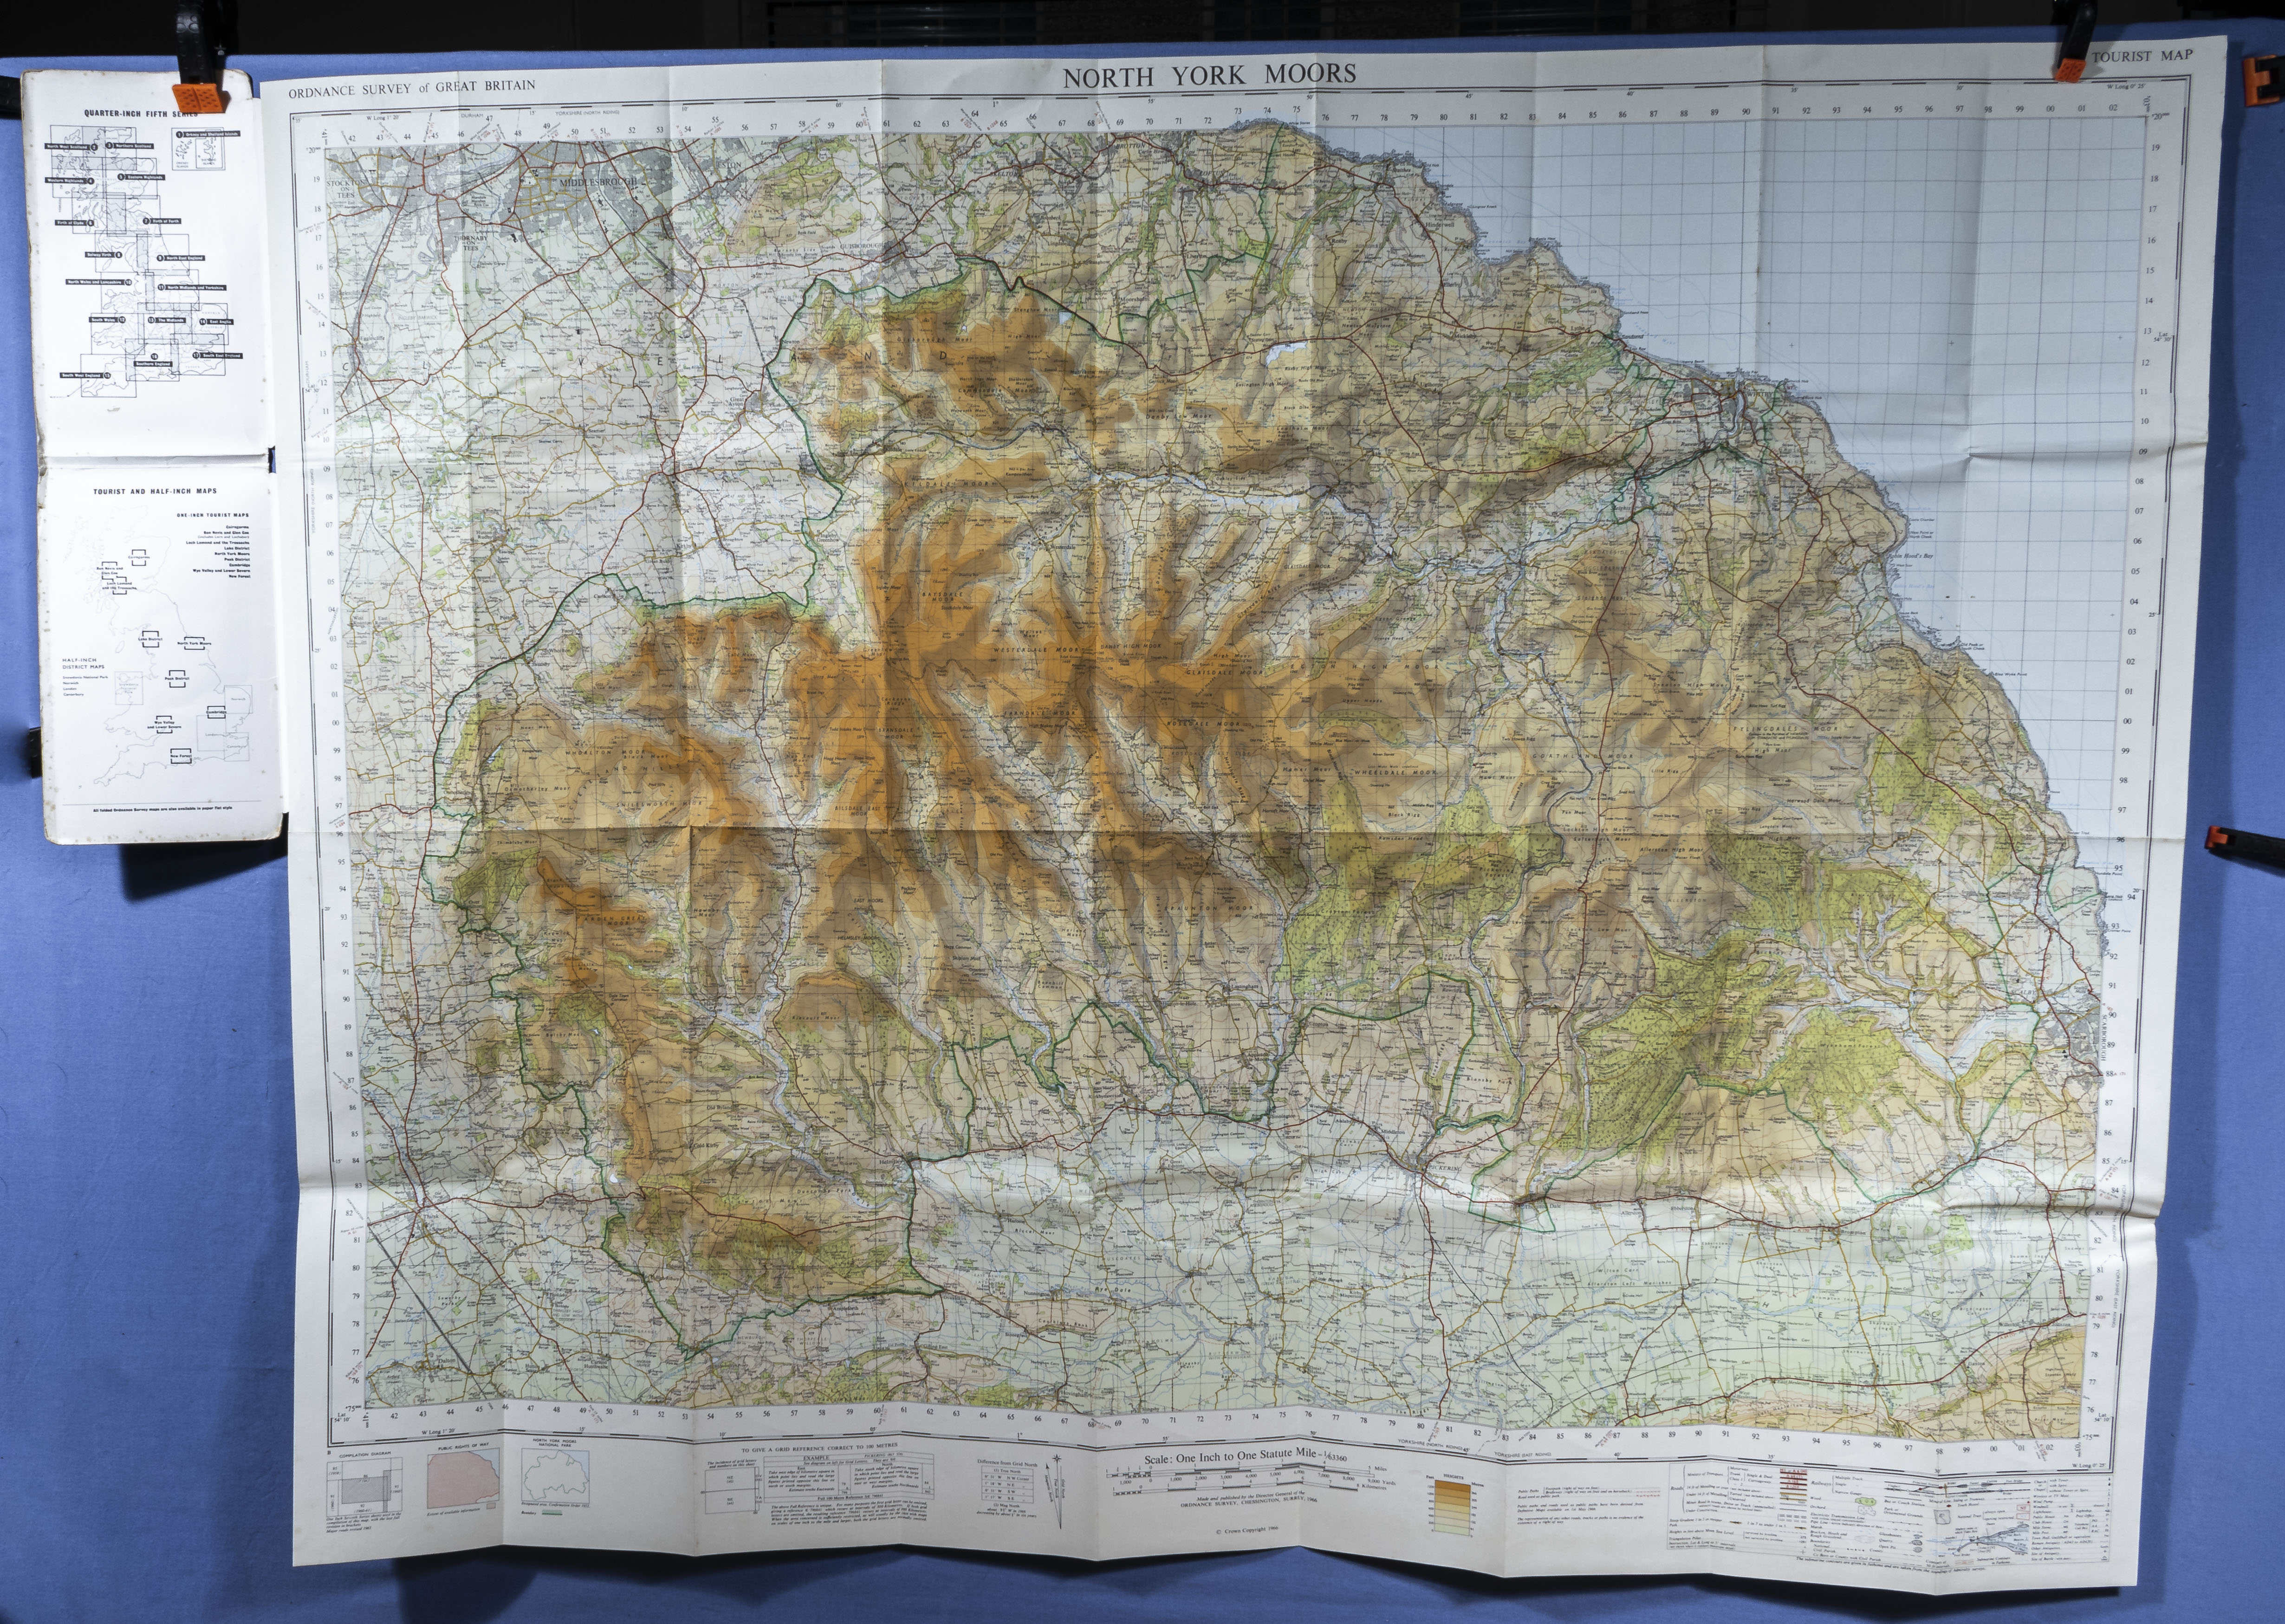 Four Ordnance Survey paper maps, Guernsey, North Yorkshire Moors, sheet NZ80 and sheet NZ81 together - Image 7 of 10